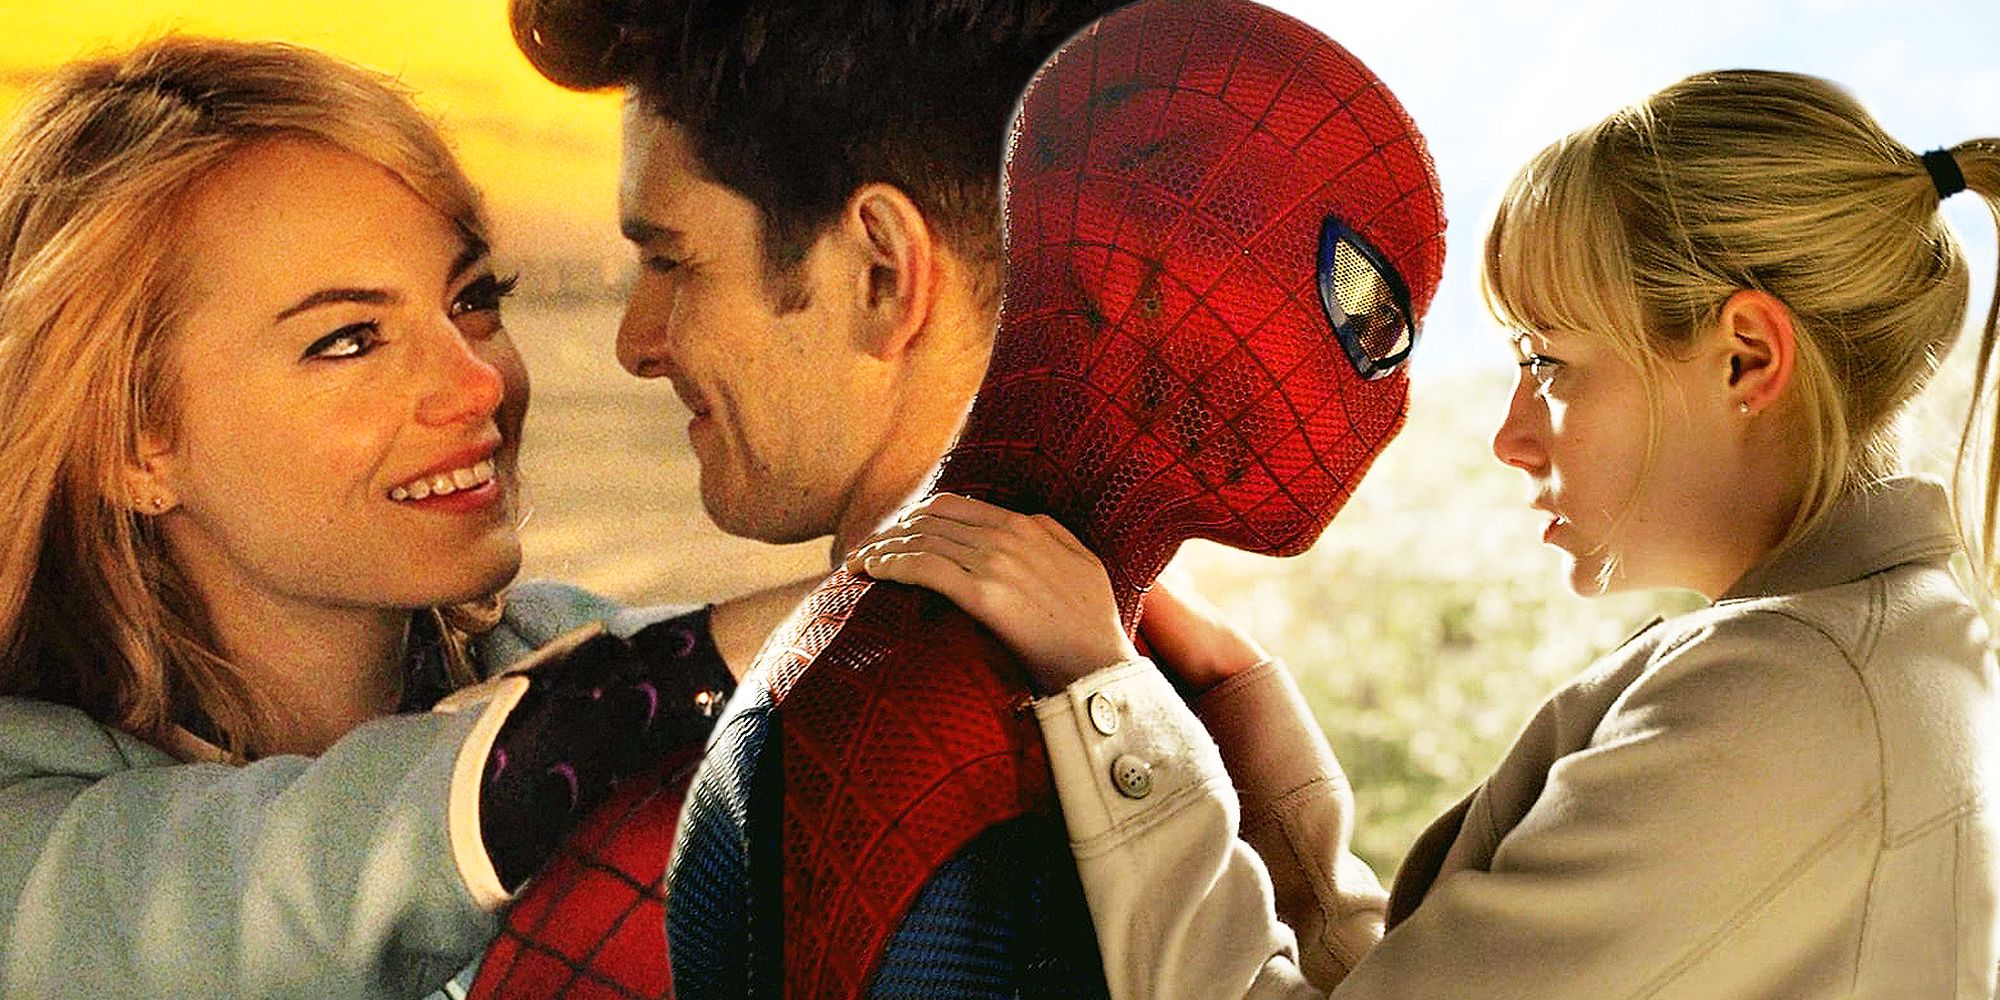 Emma Stone as Gwen Stacy and Andrew Garfield as Peter Parker in The Amazing Spider-Man 1 &amp; 2